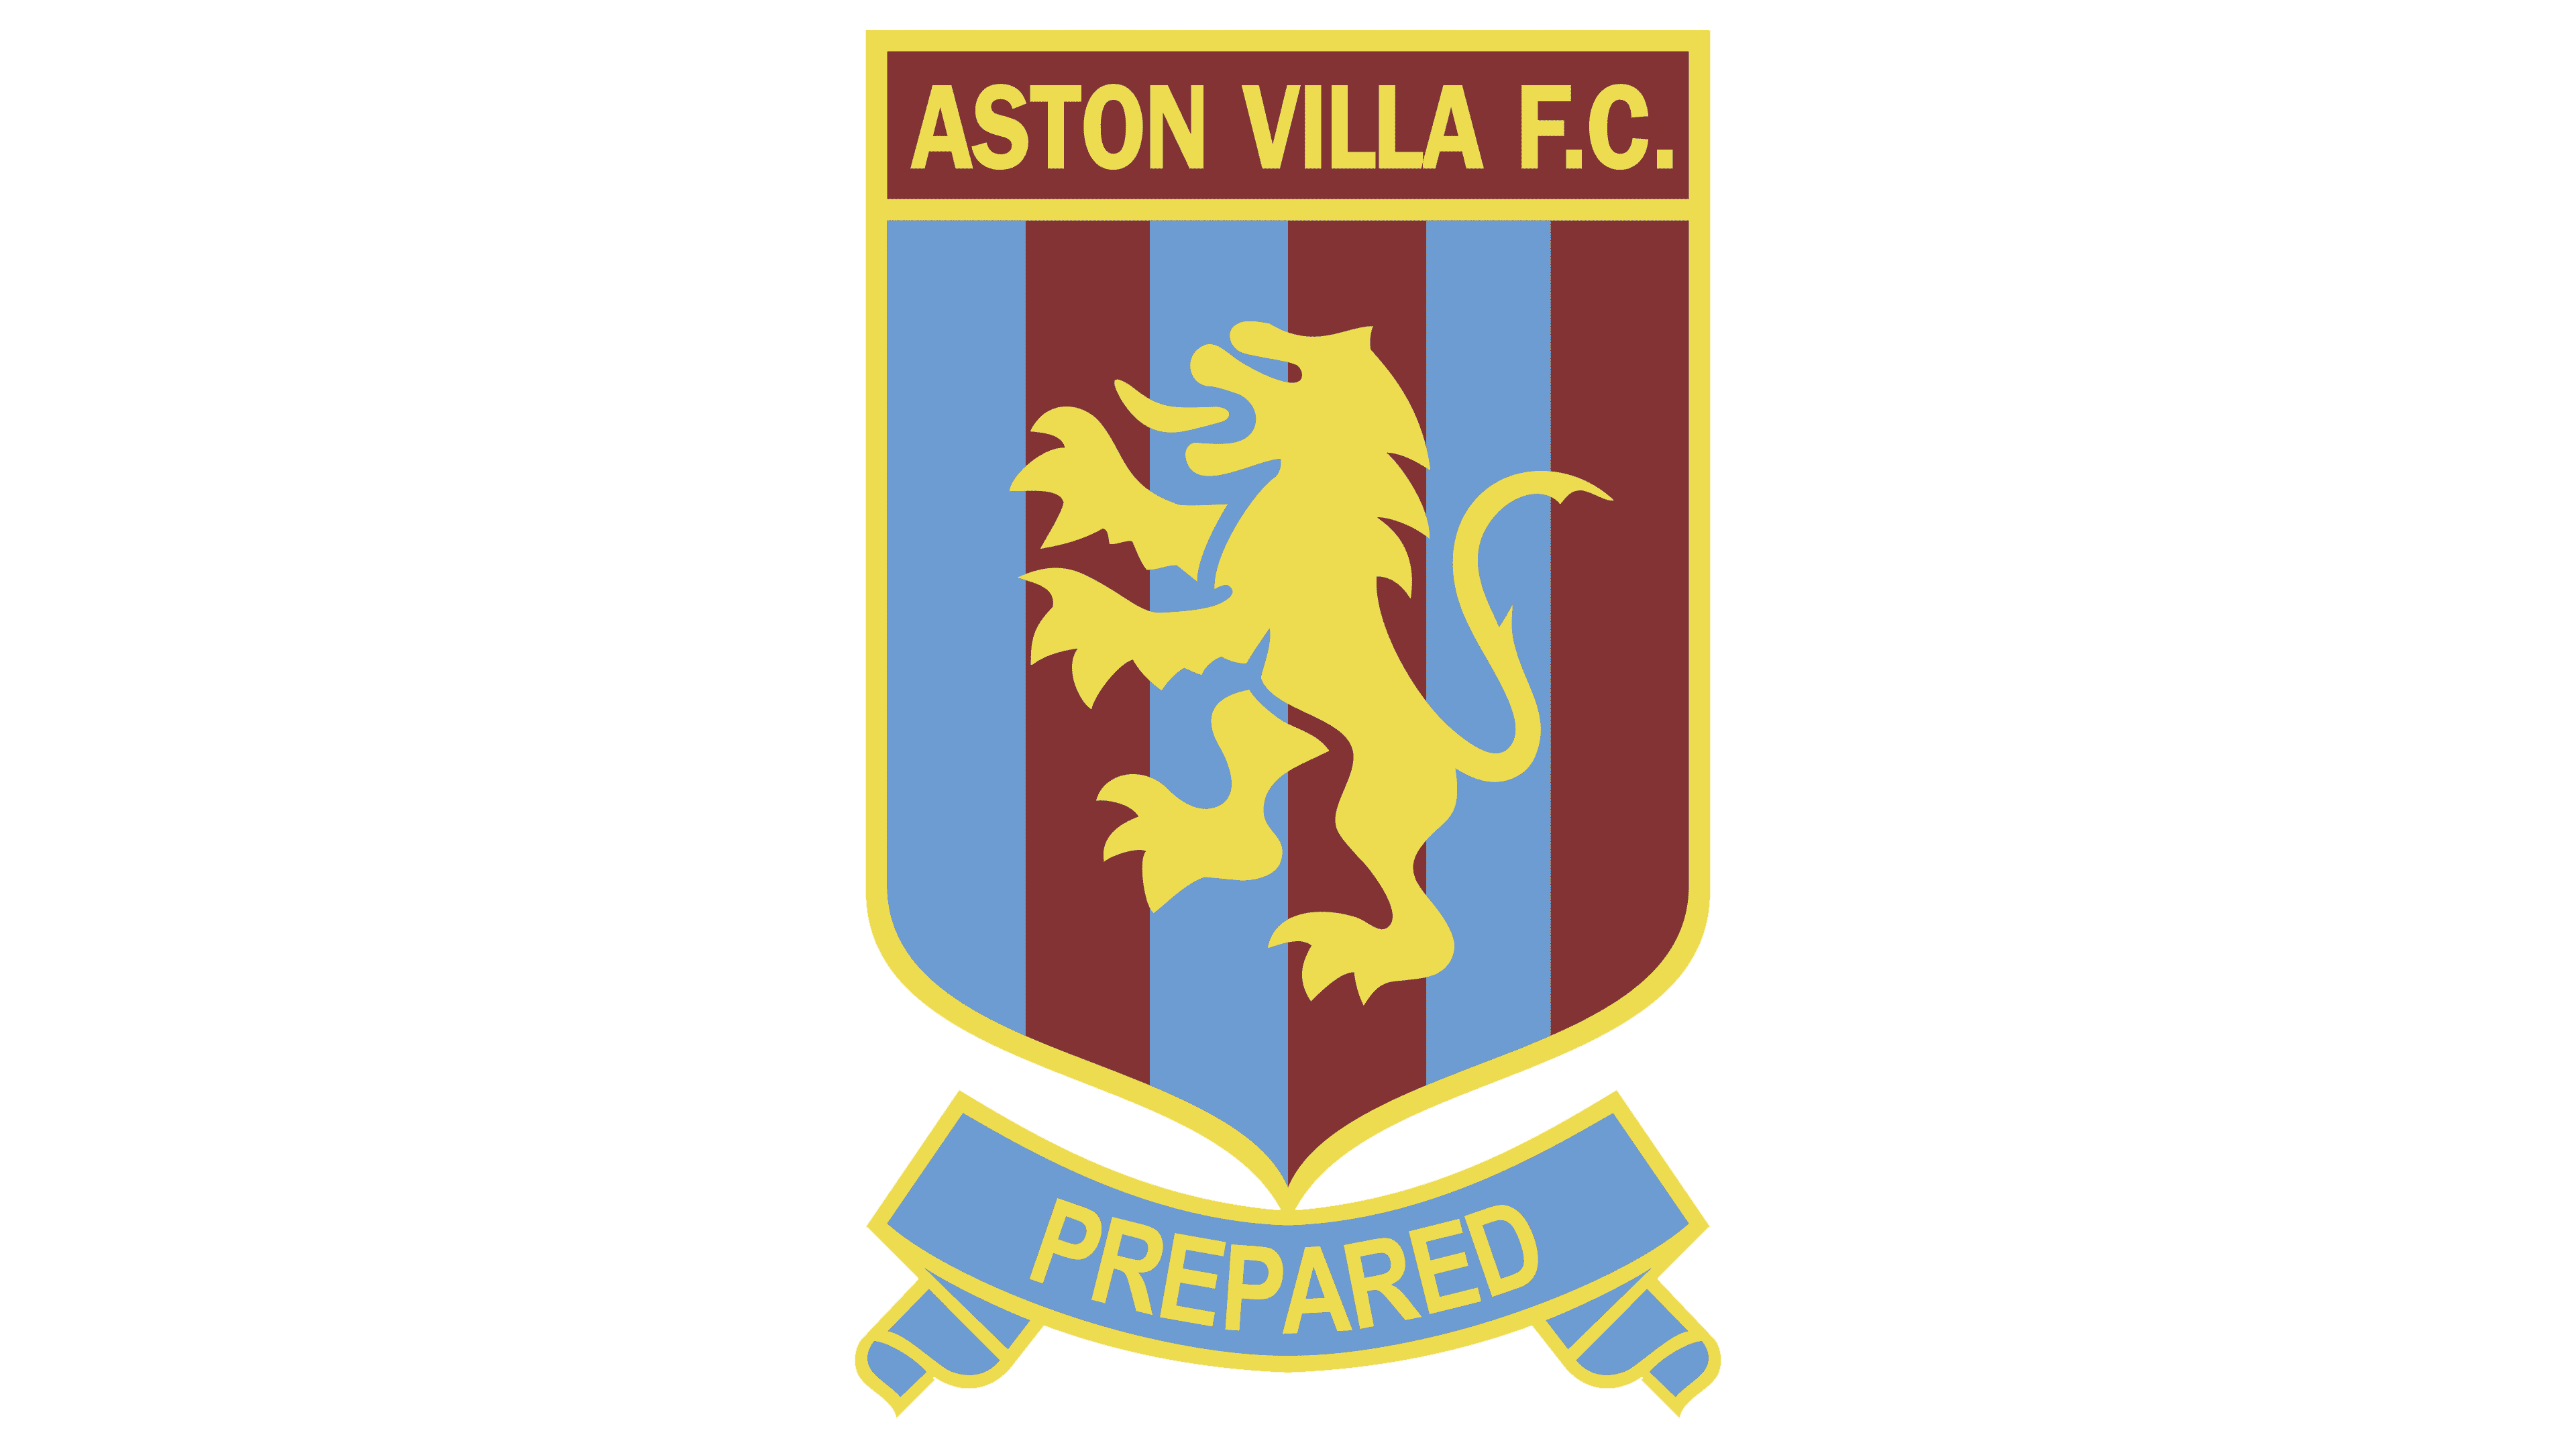 Aston Villa Logo The Most Famous Brands And Company Logos In The World